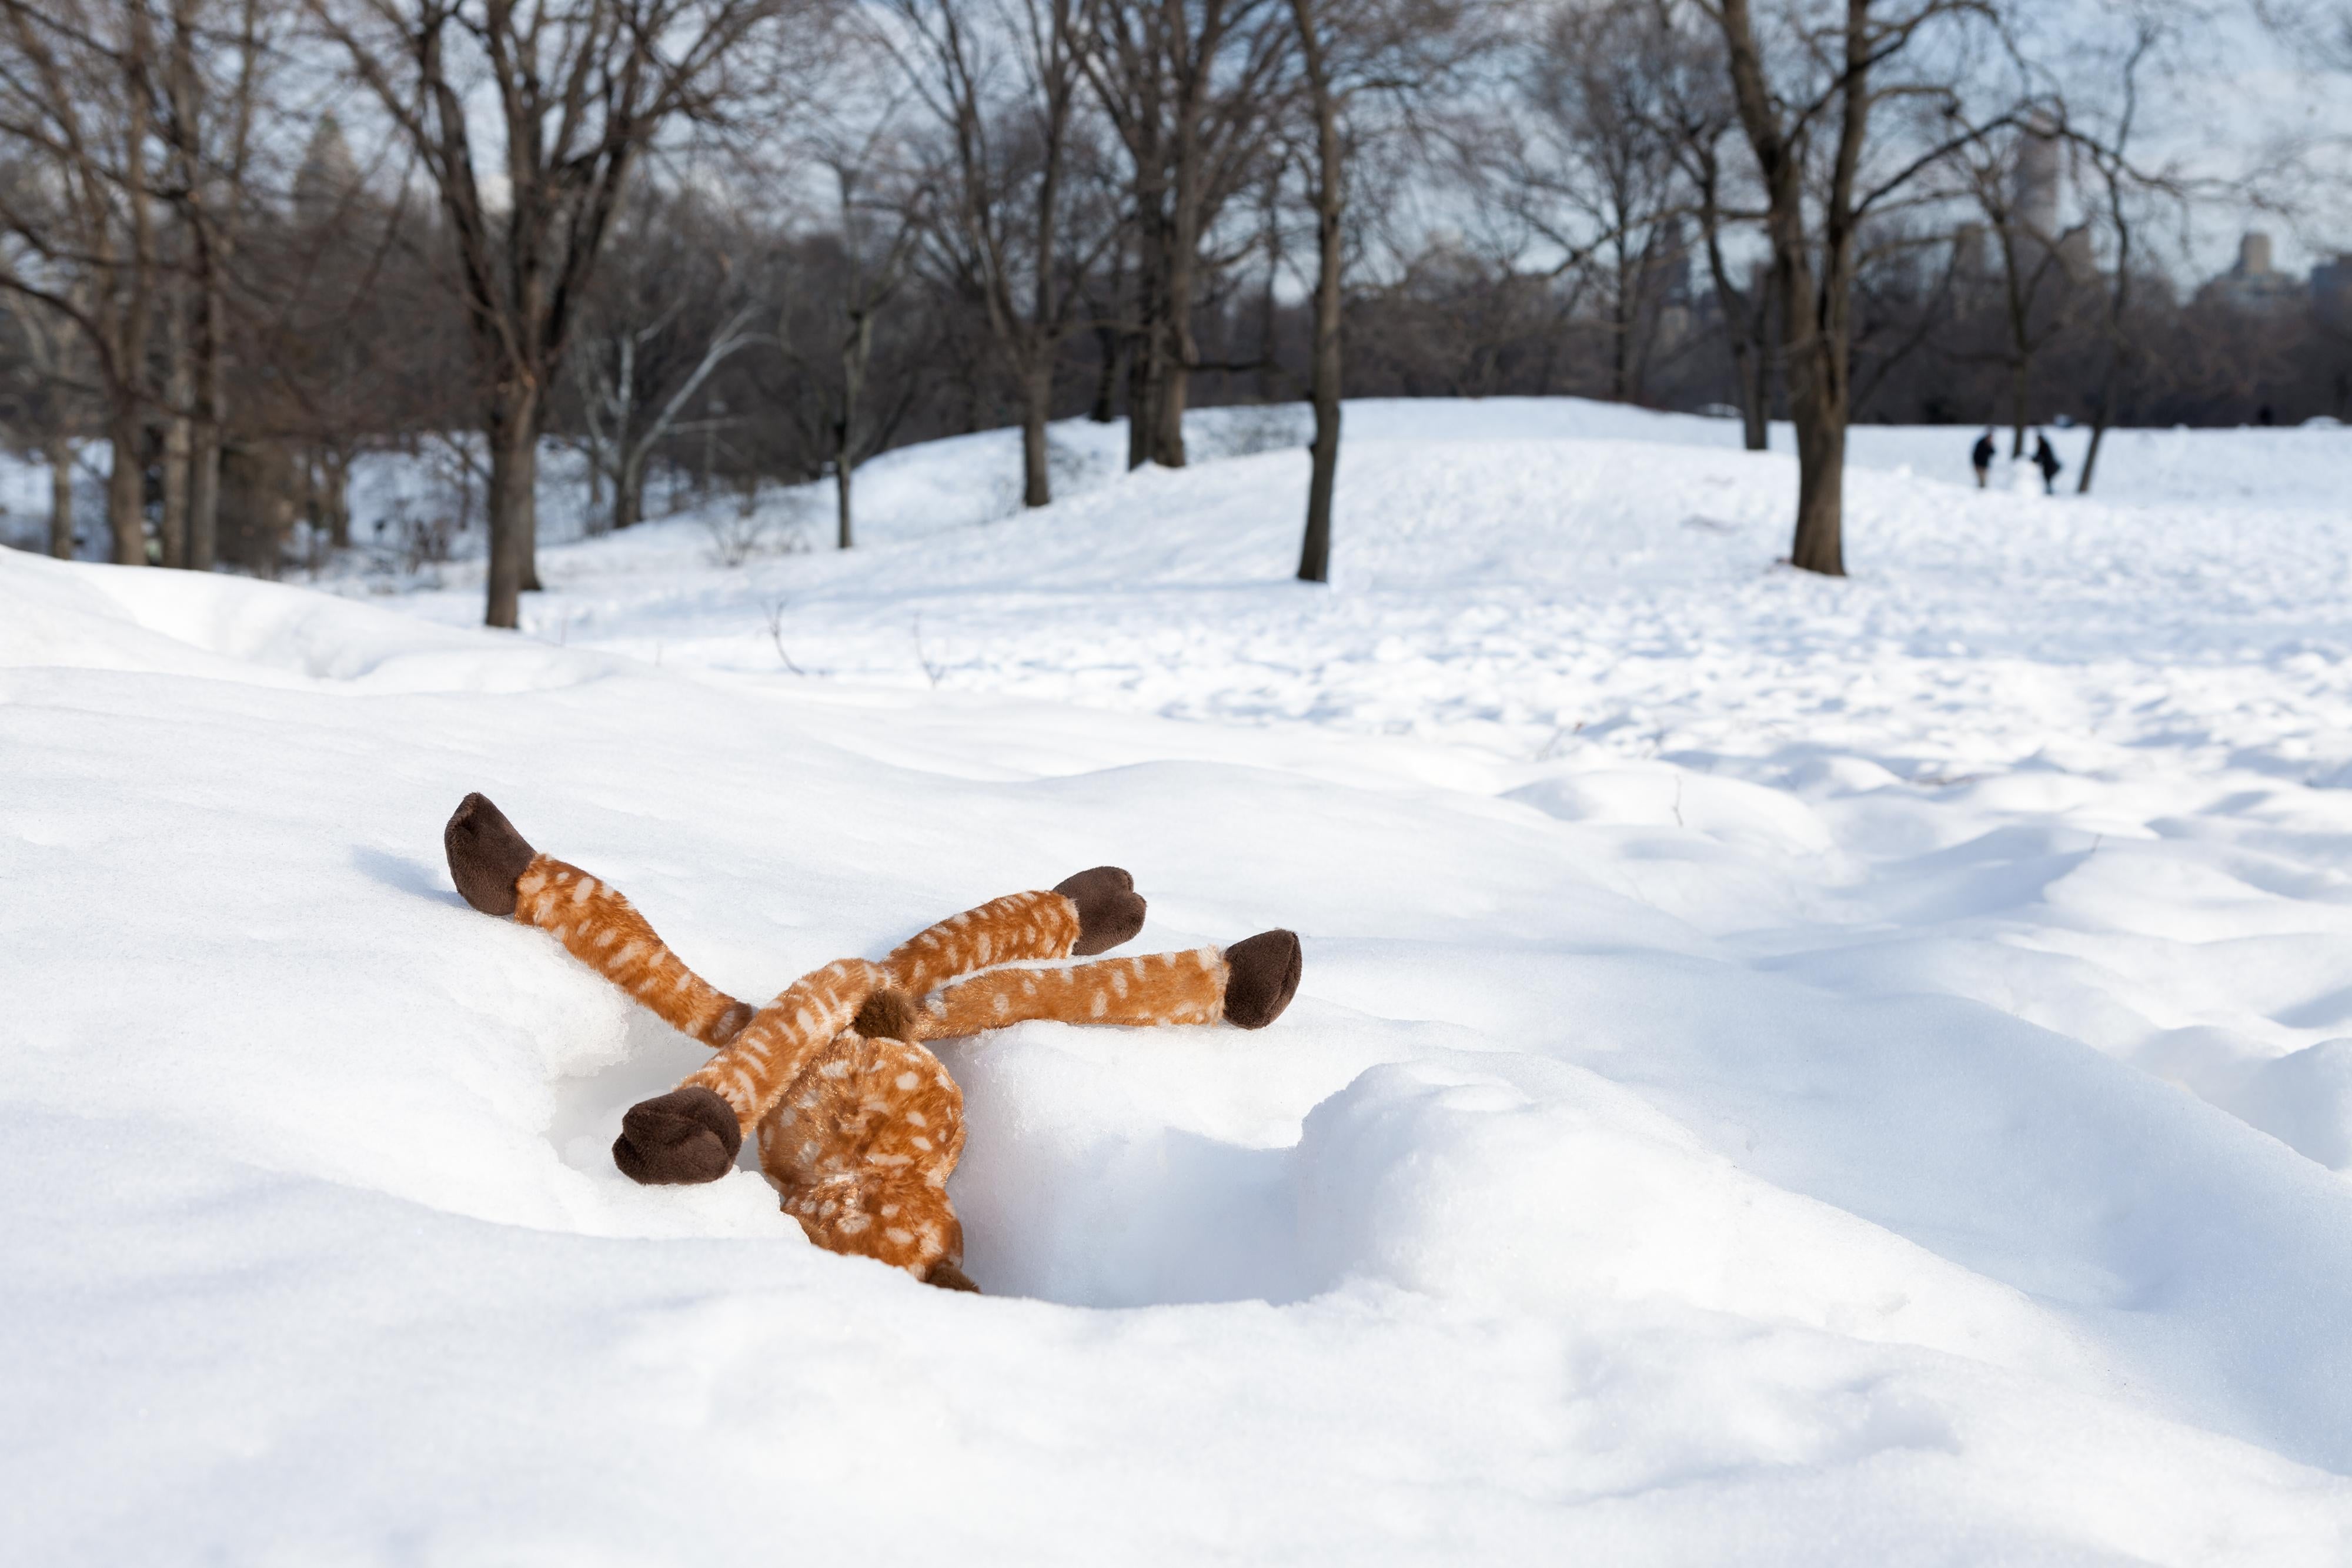 “Morbidity & Mortality: Deer” Humorous Photograph of a Dog Toy in the Snow